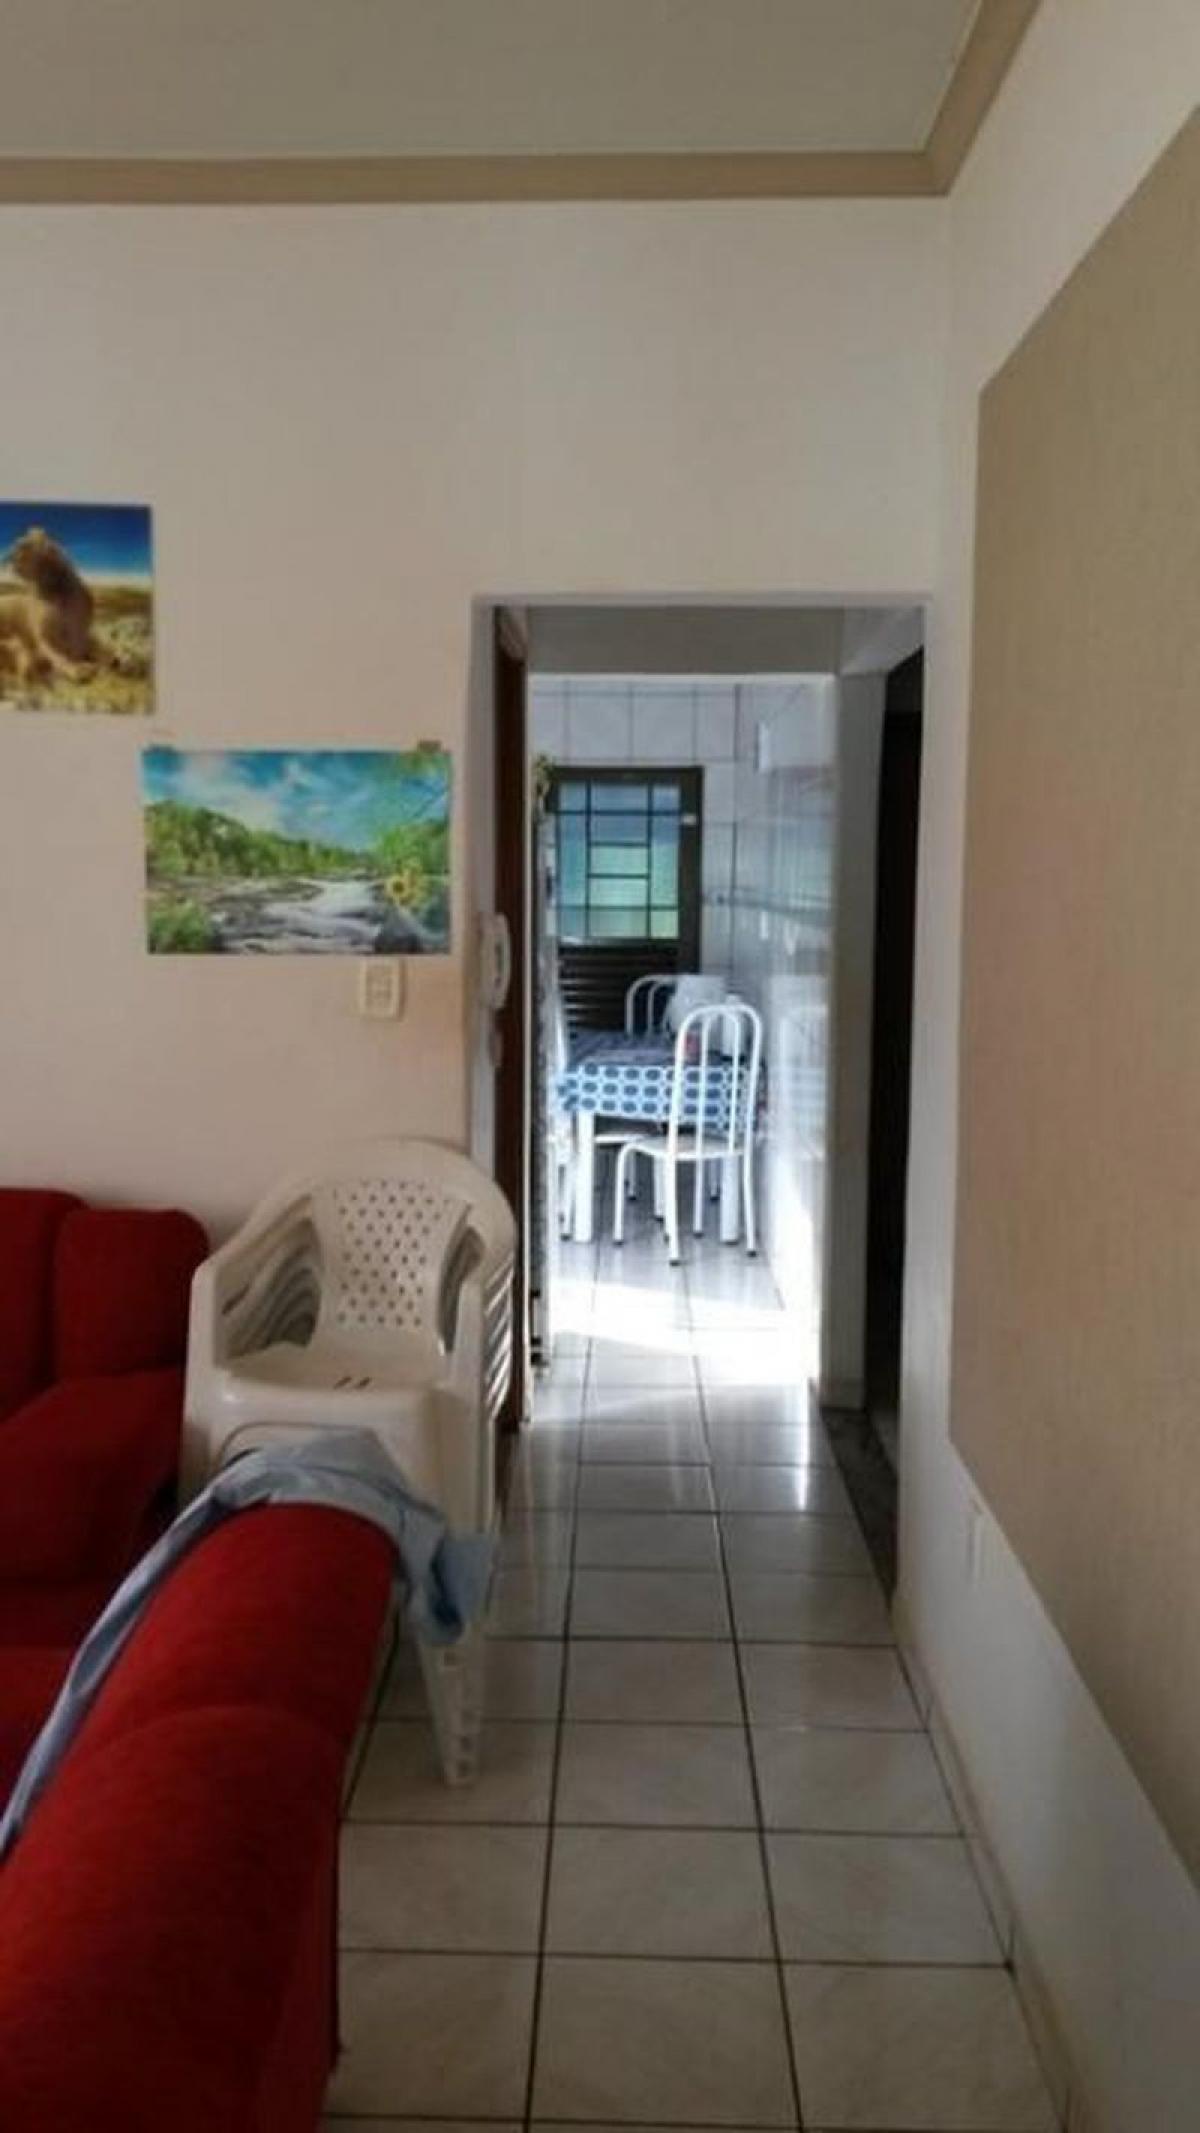 Picture of Home For Sale in Uberaba, Minas Gerais, Brazil